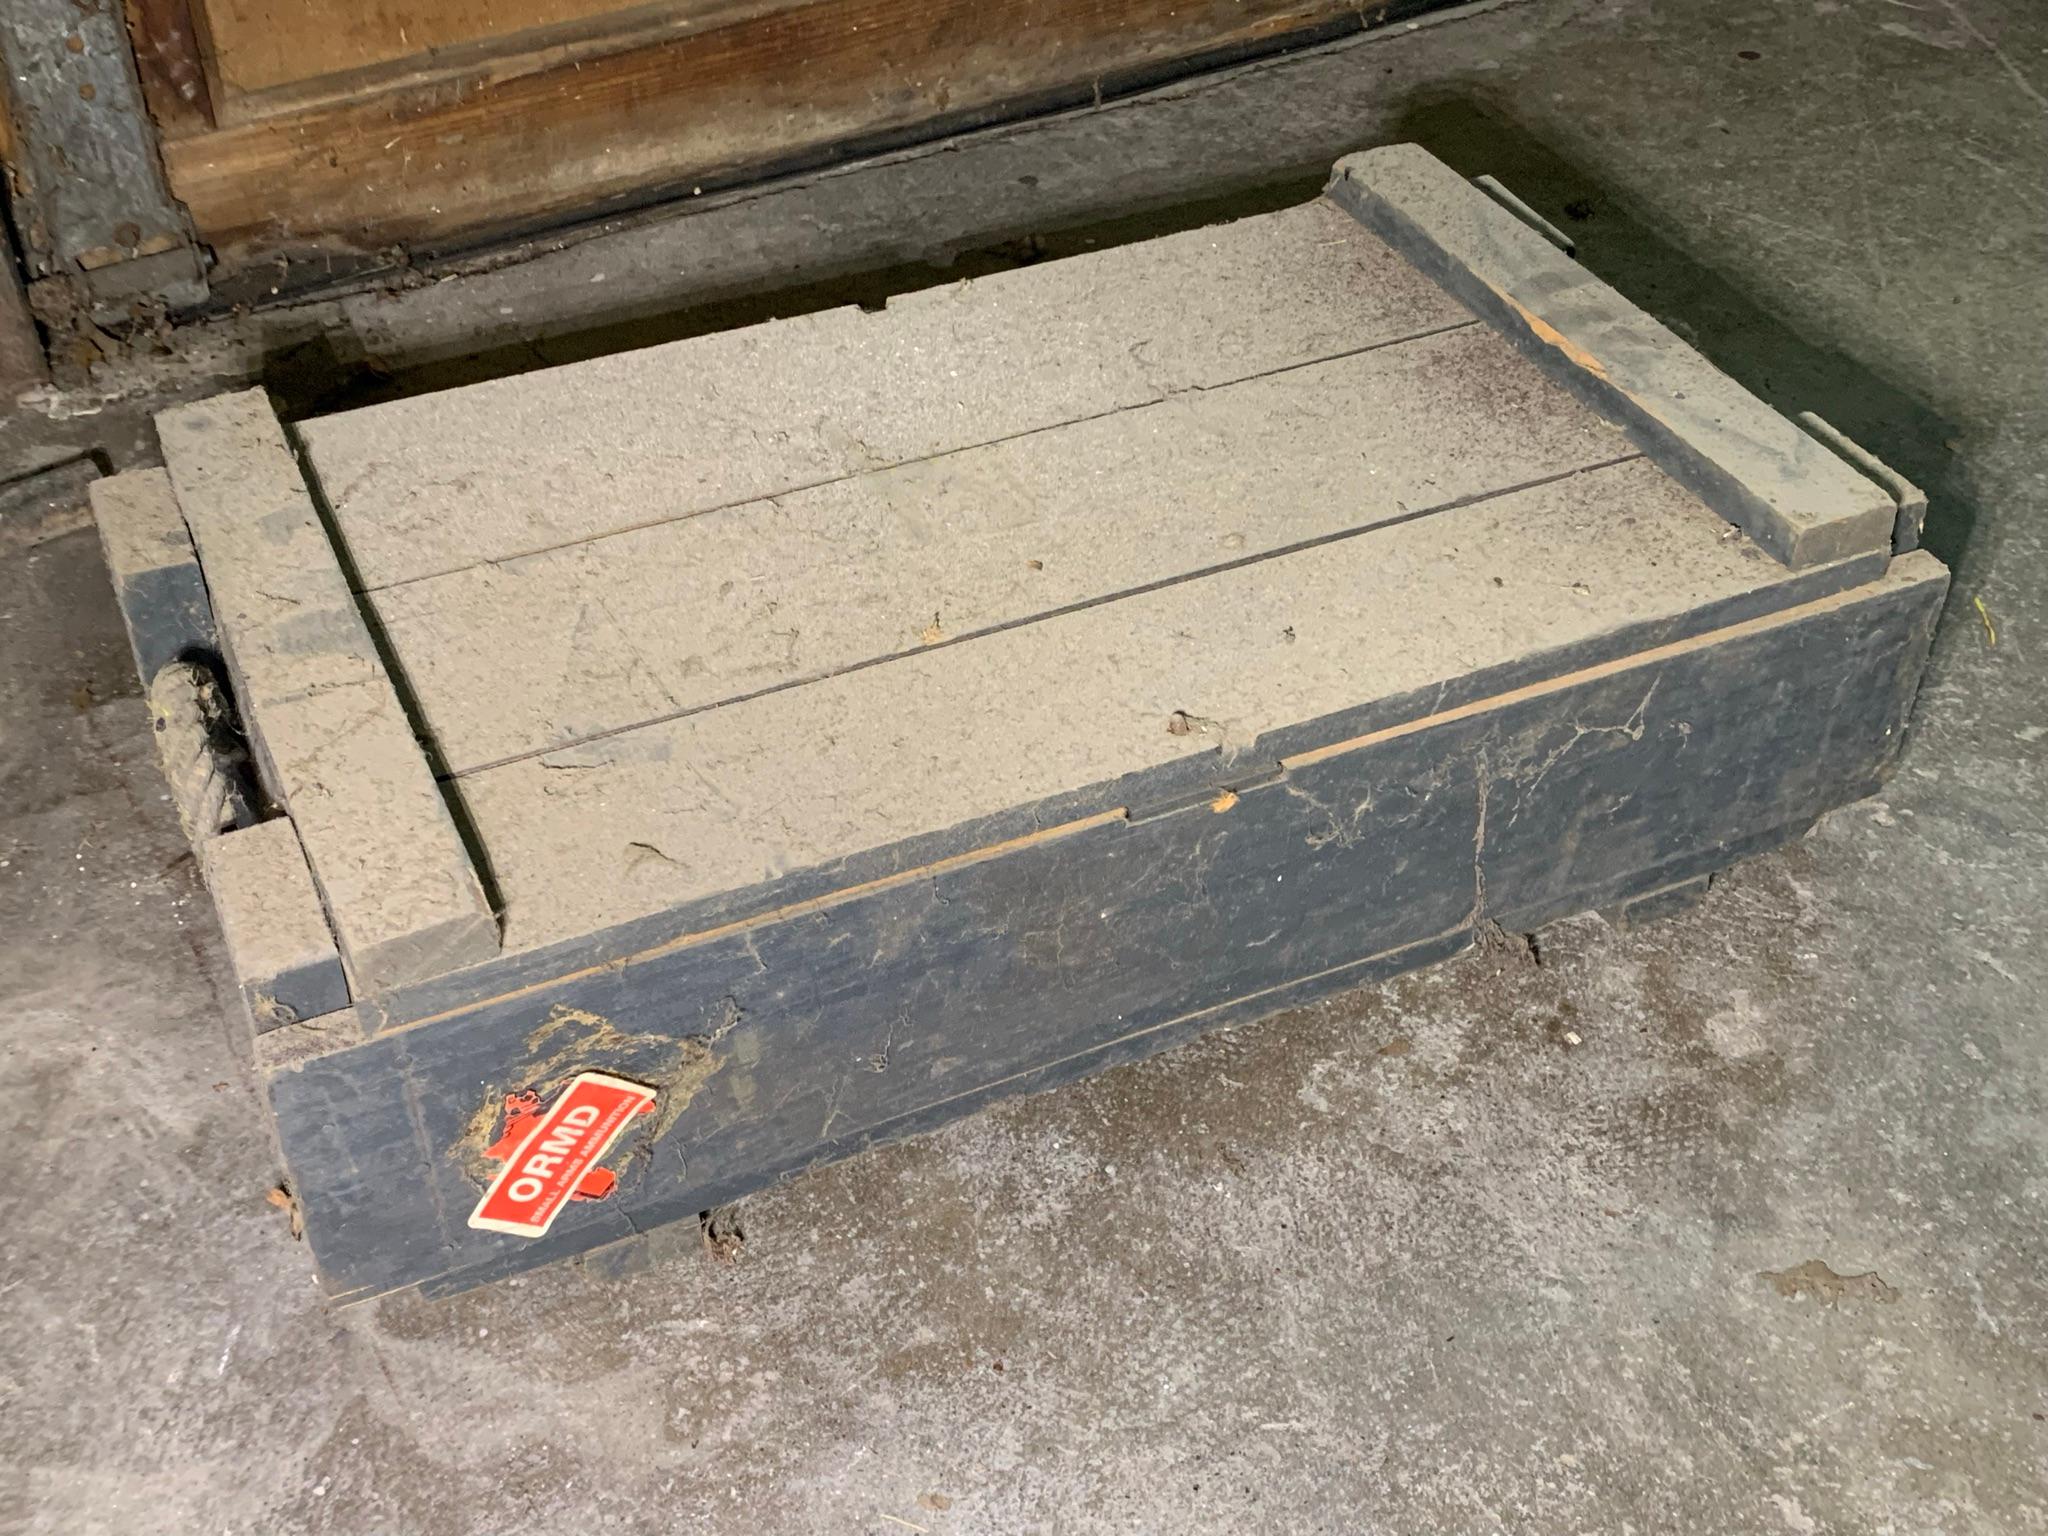 Great Group of Vintage Fishing Pools and Wooden Ammo Crate